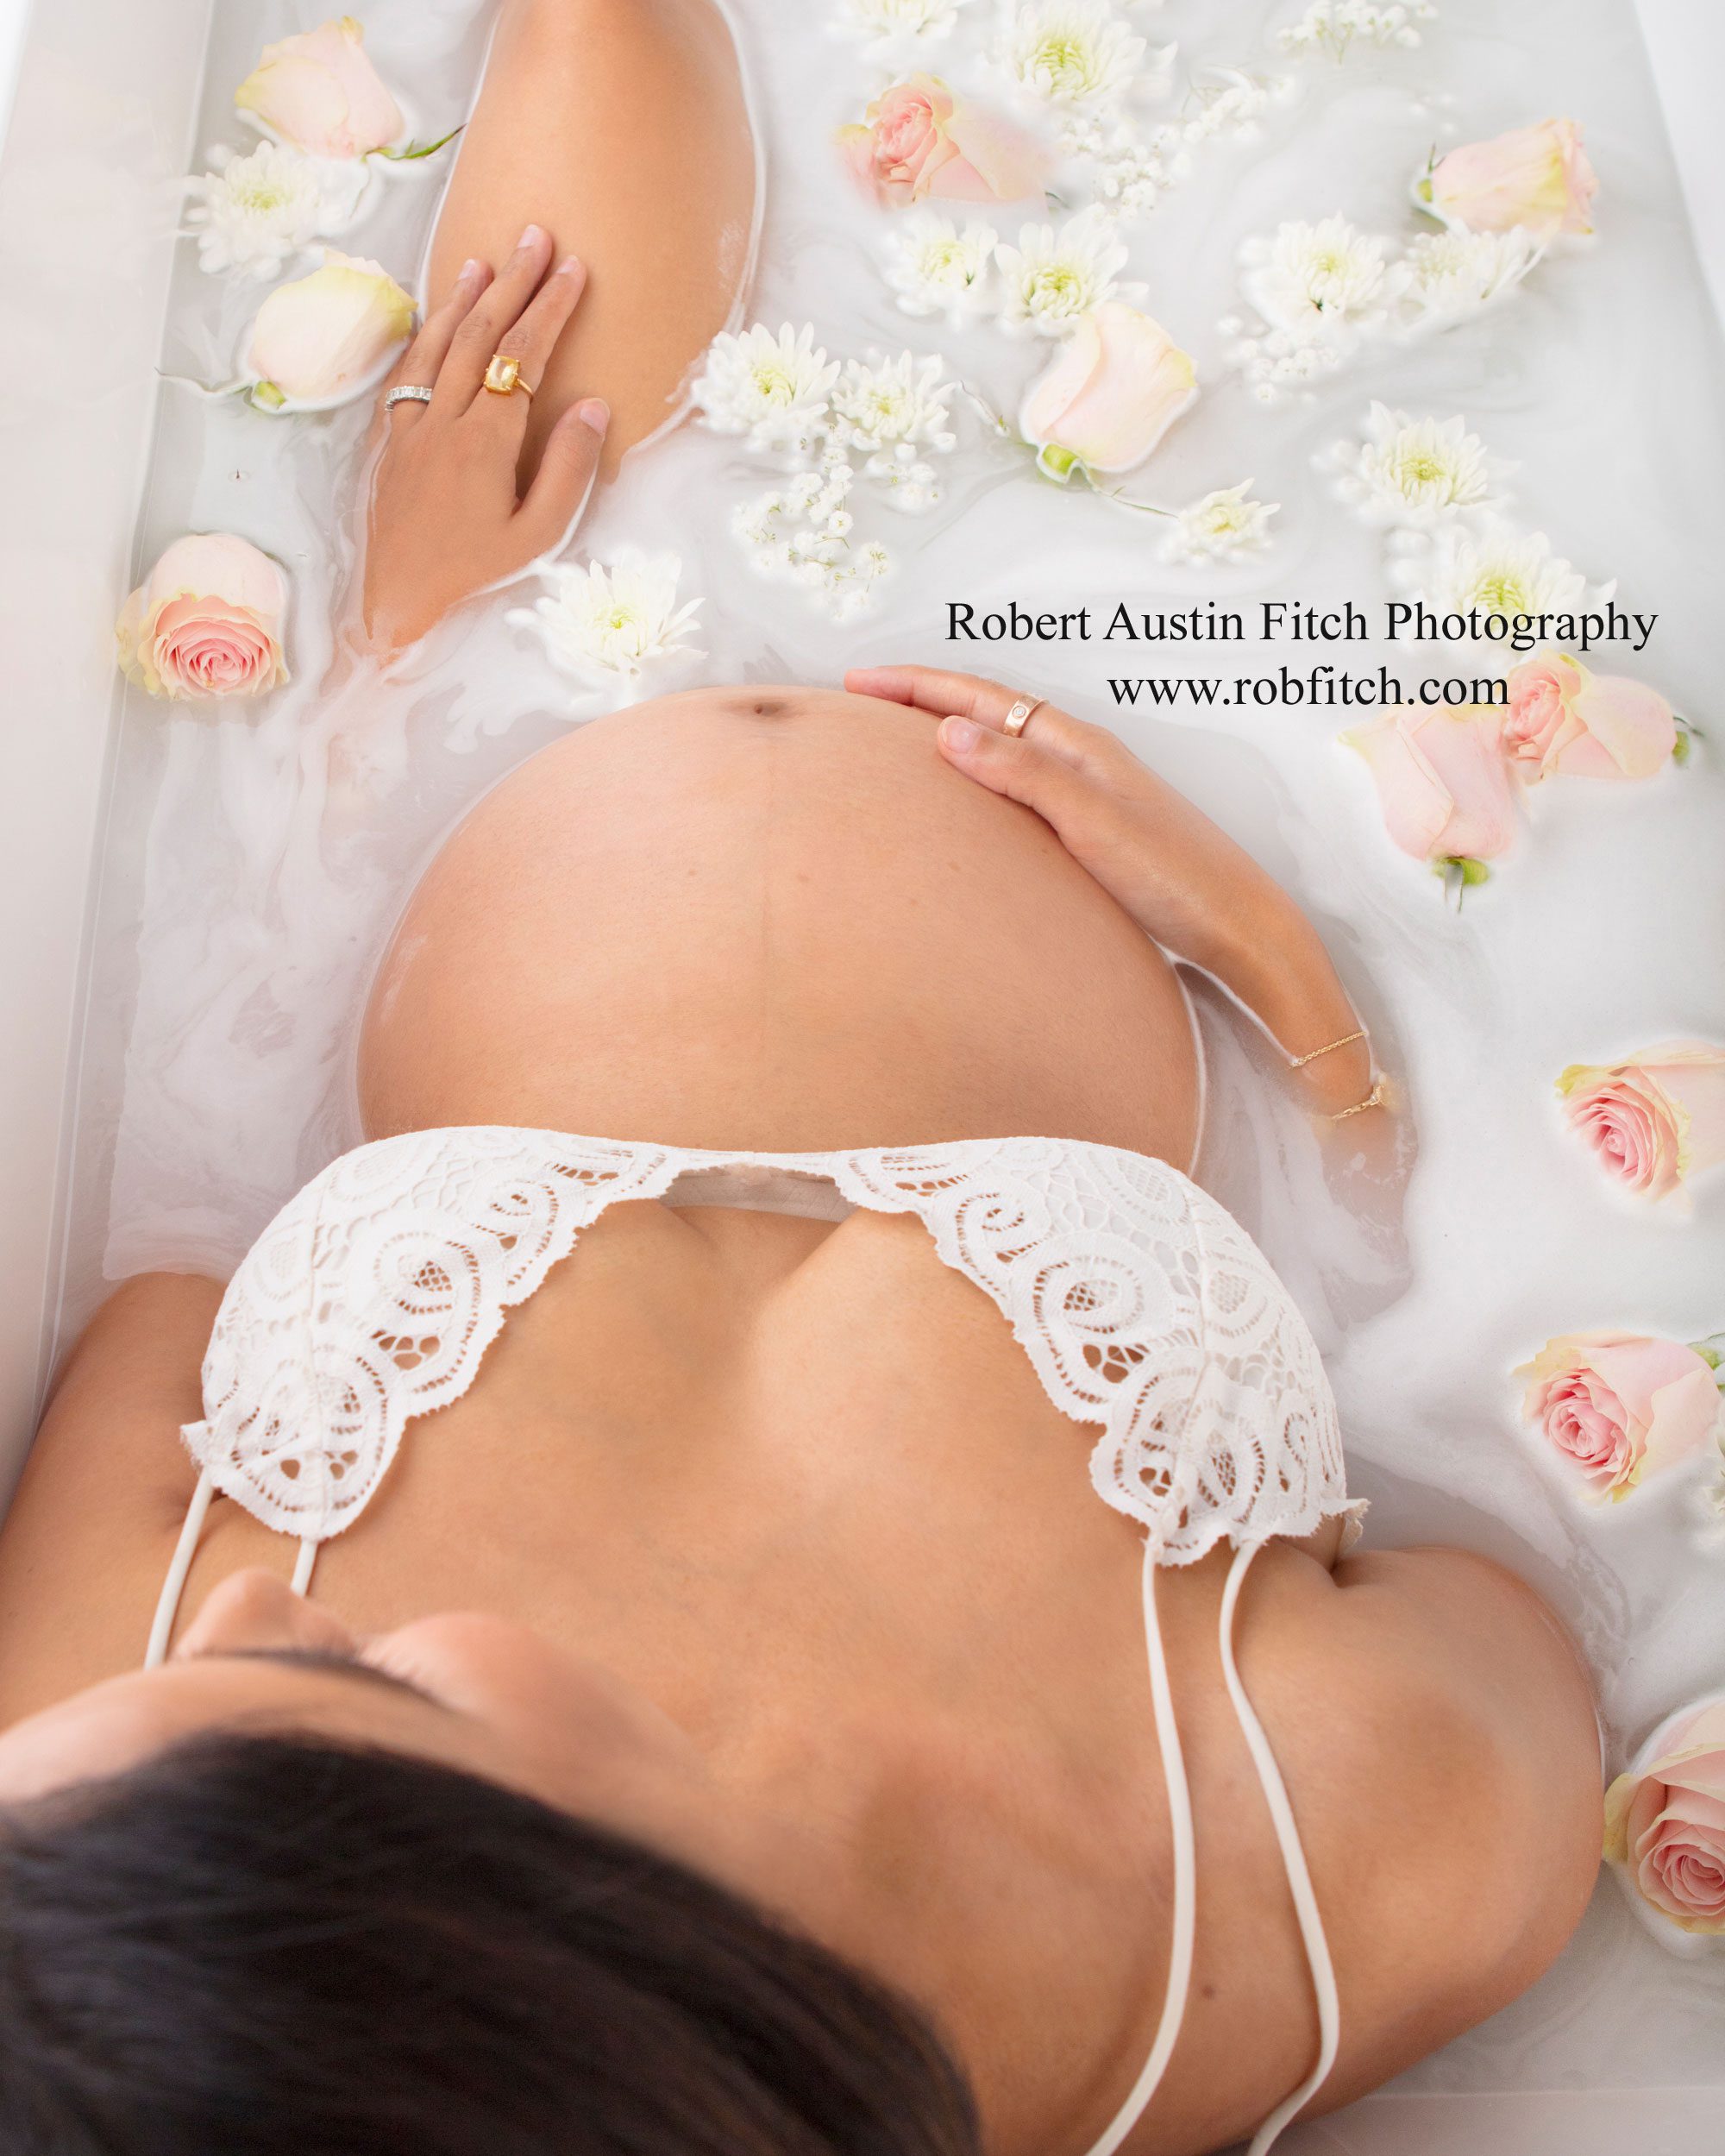 NYC Maternity Photographer Robert Austin Fitch Photography